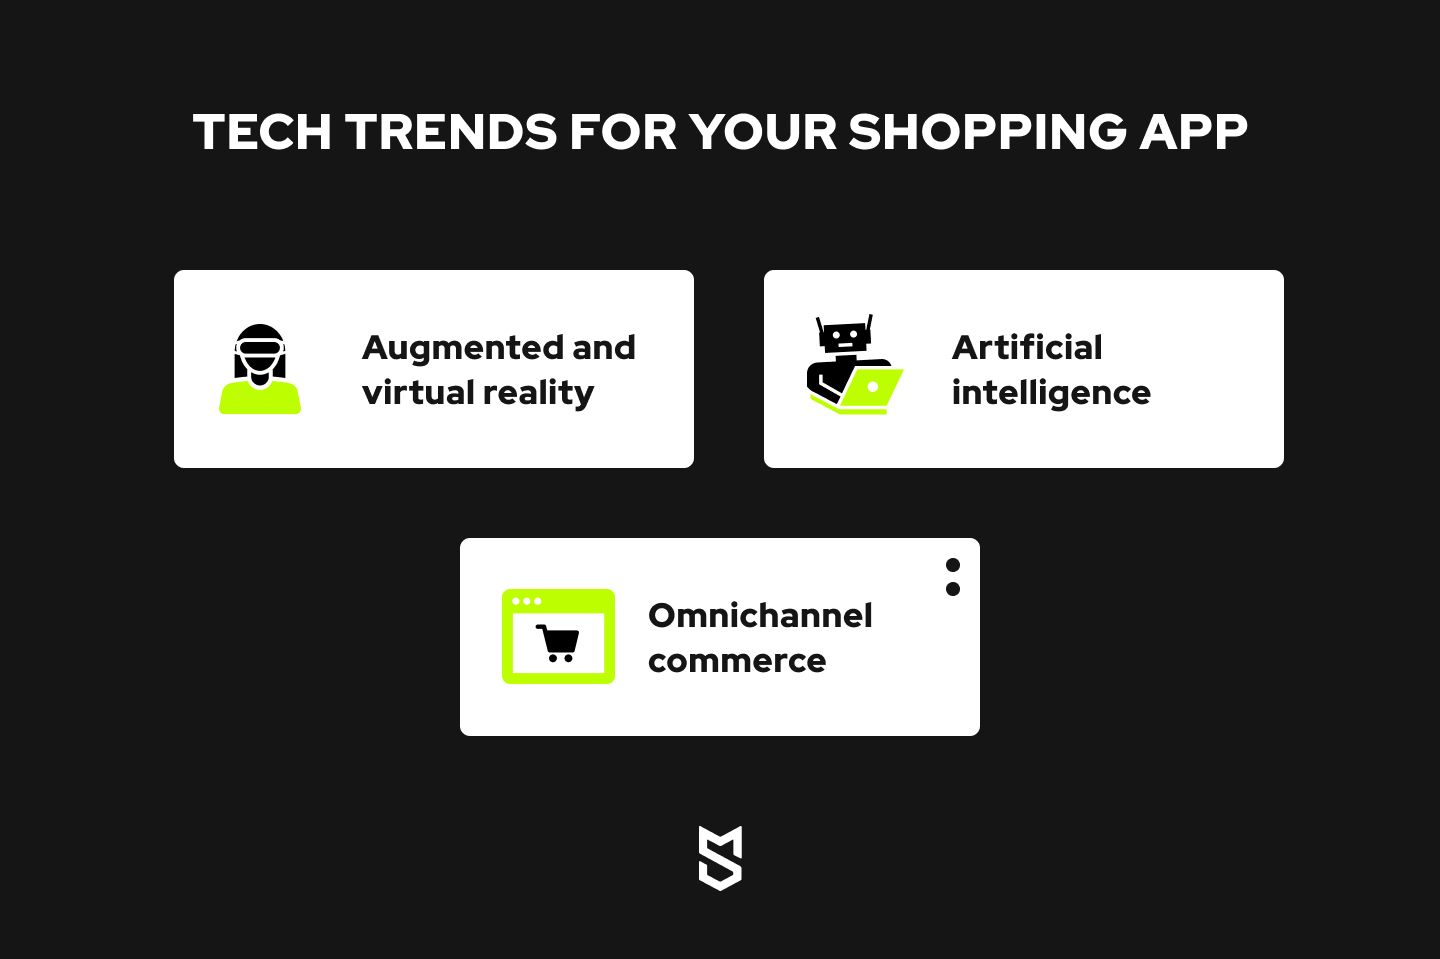 Tech trends for your shopping app